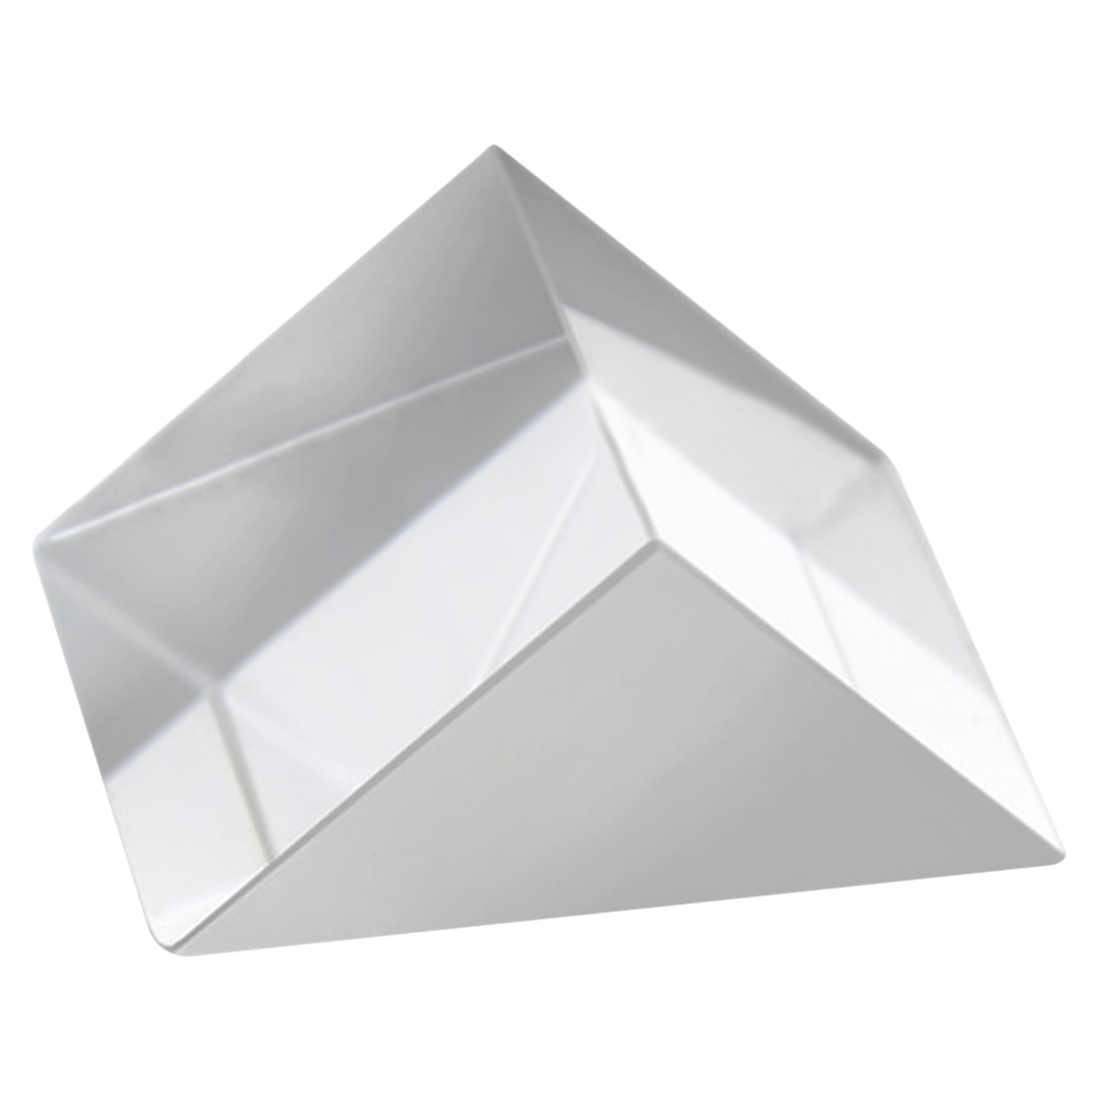 Glass Prism Equilateral/ Right Angle (Small)